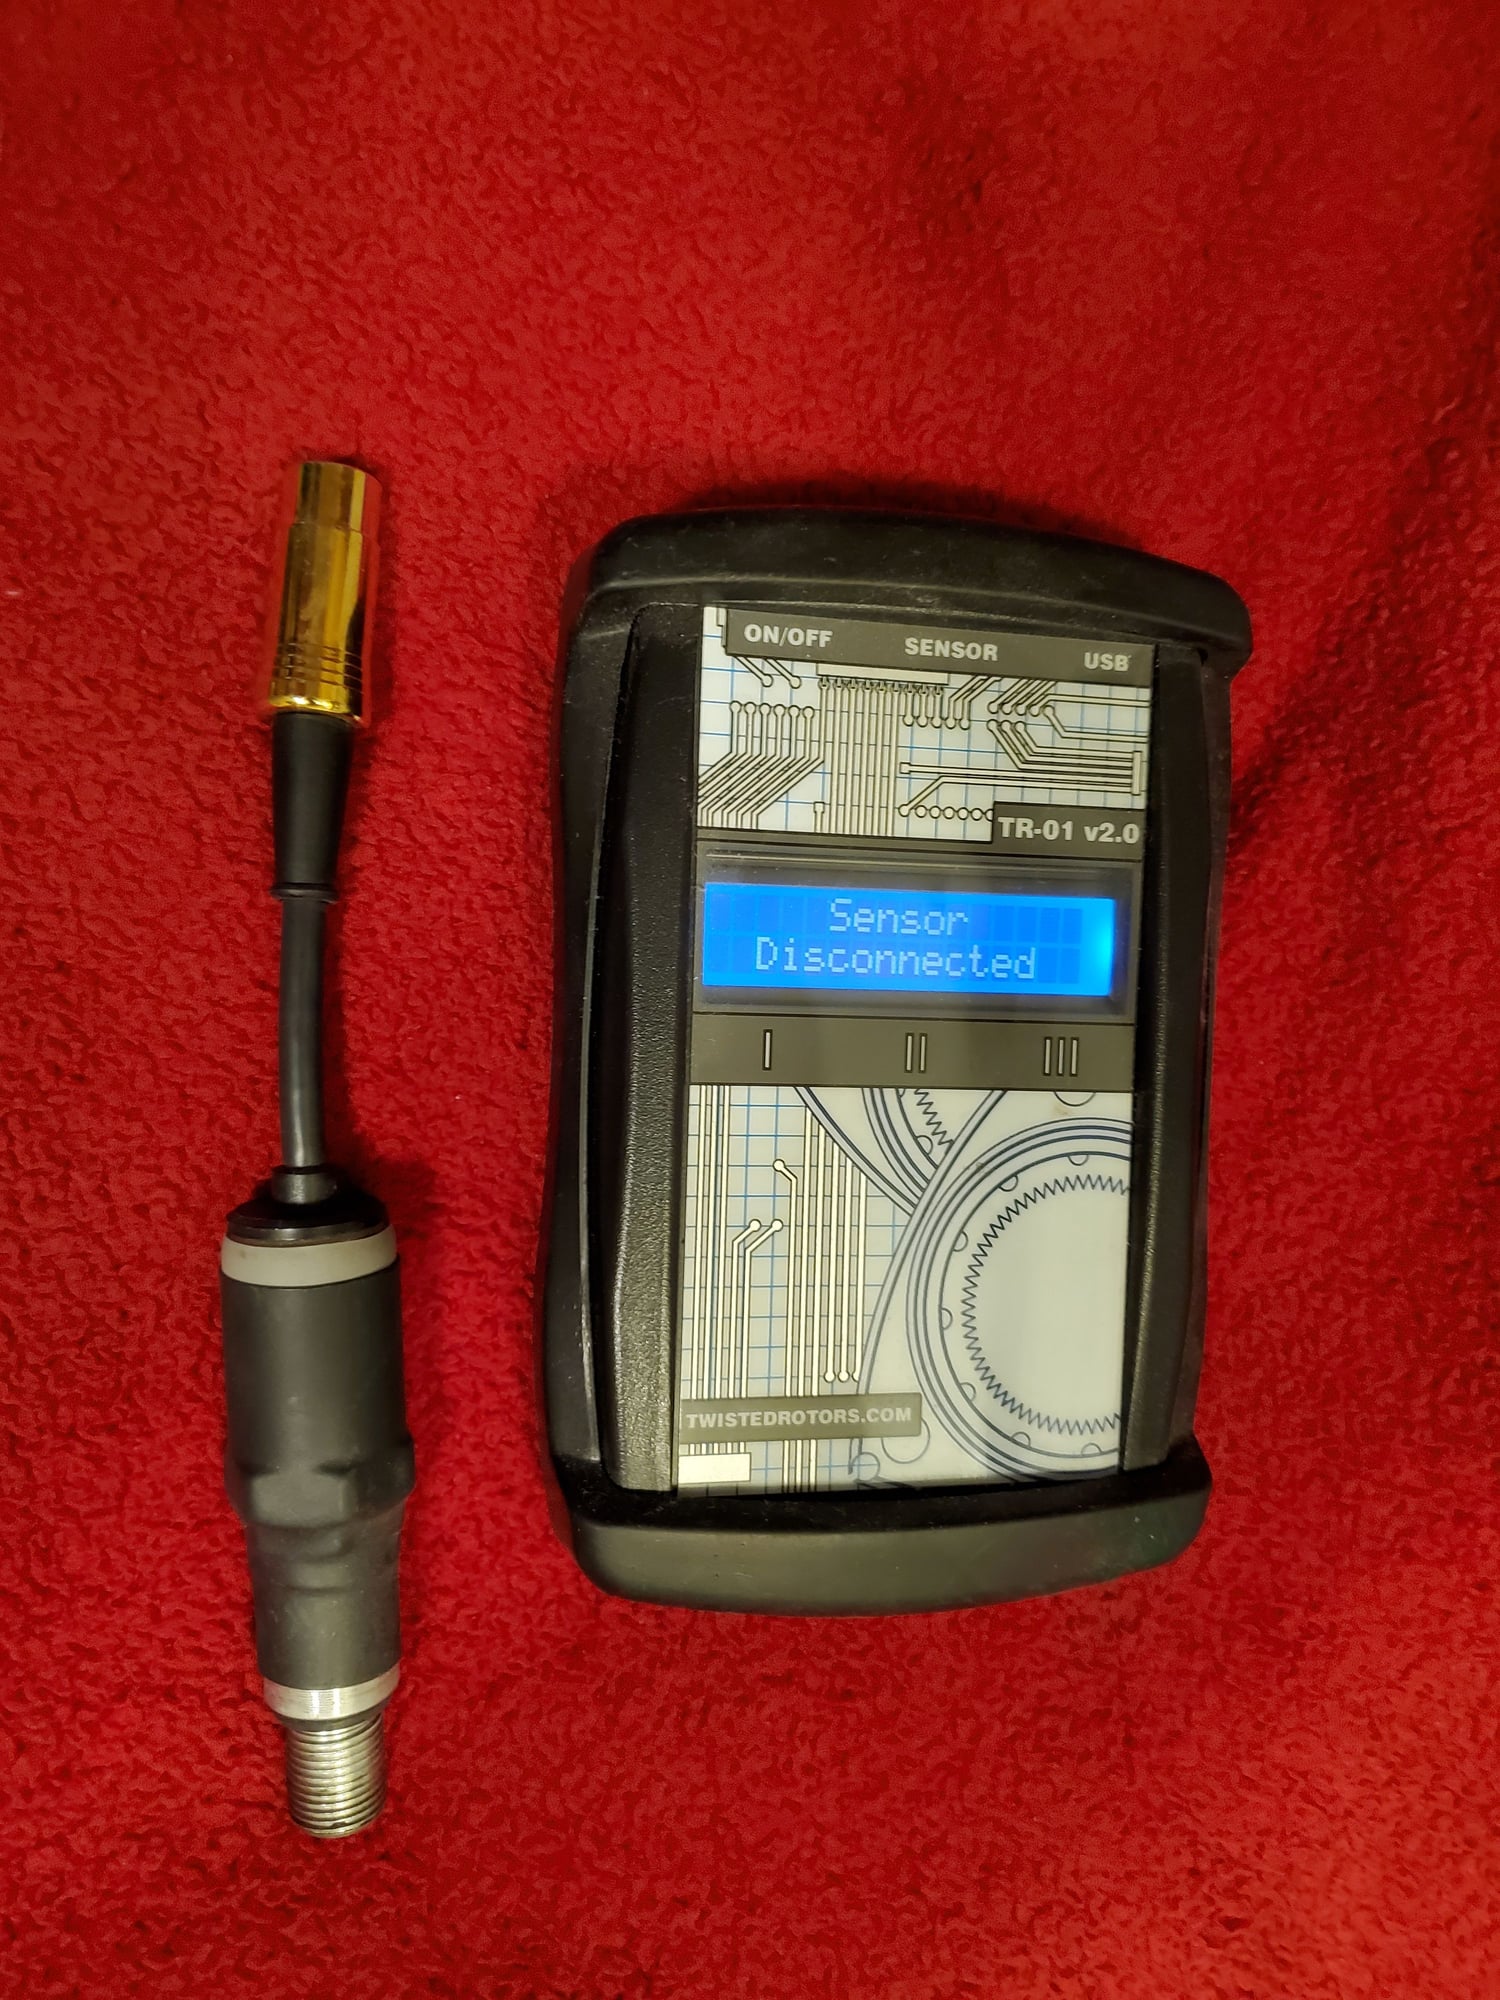 Accessories - Twisted Rotary Compression Tester. $100 - Used - 0  All Models - Lynnwood, WA 98036, United States